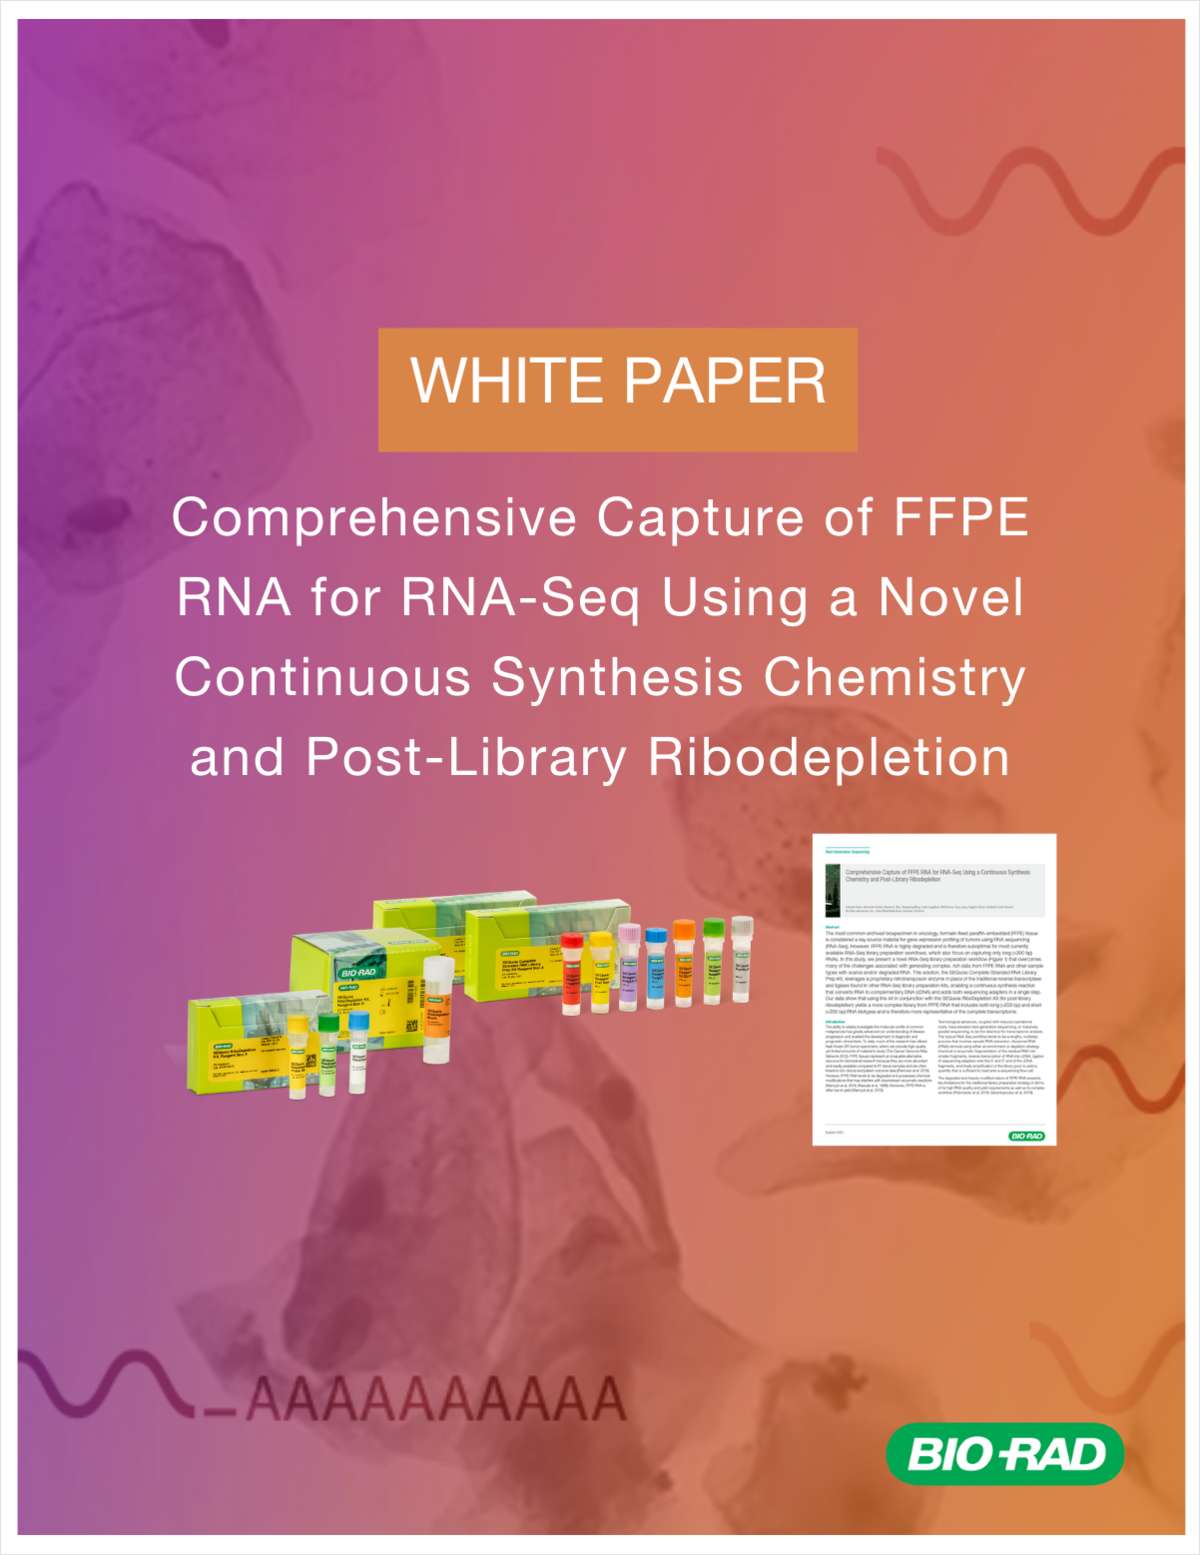 Comprehensive Capture of FFPE RNA for RNA-Seq Using a Continuous Synthesis Chemistry and Post-Library Ribodepletion